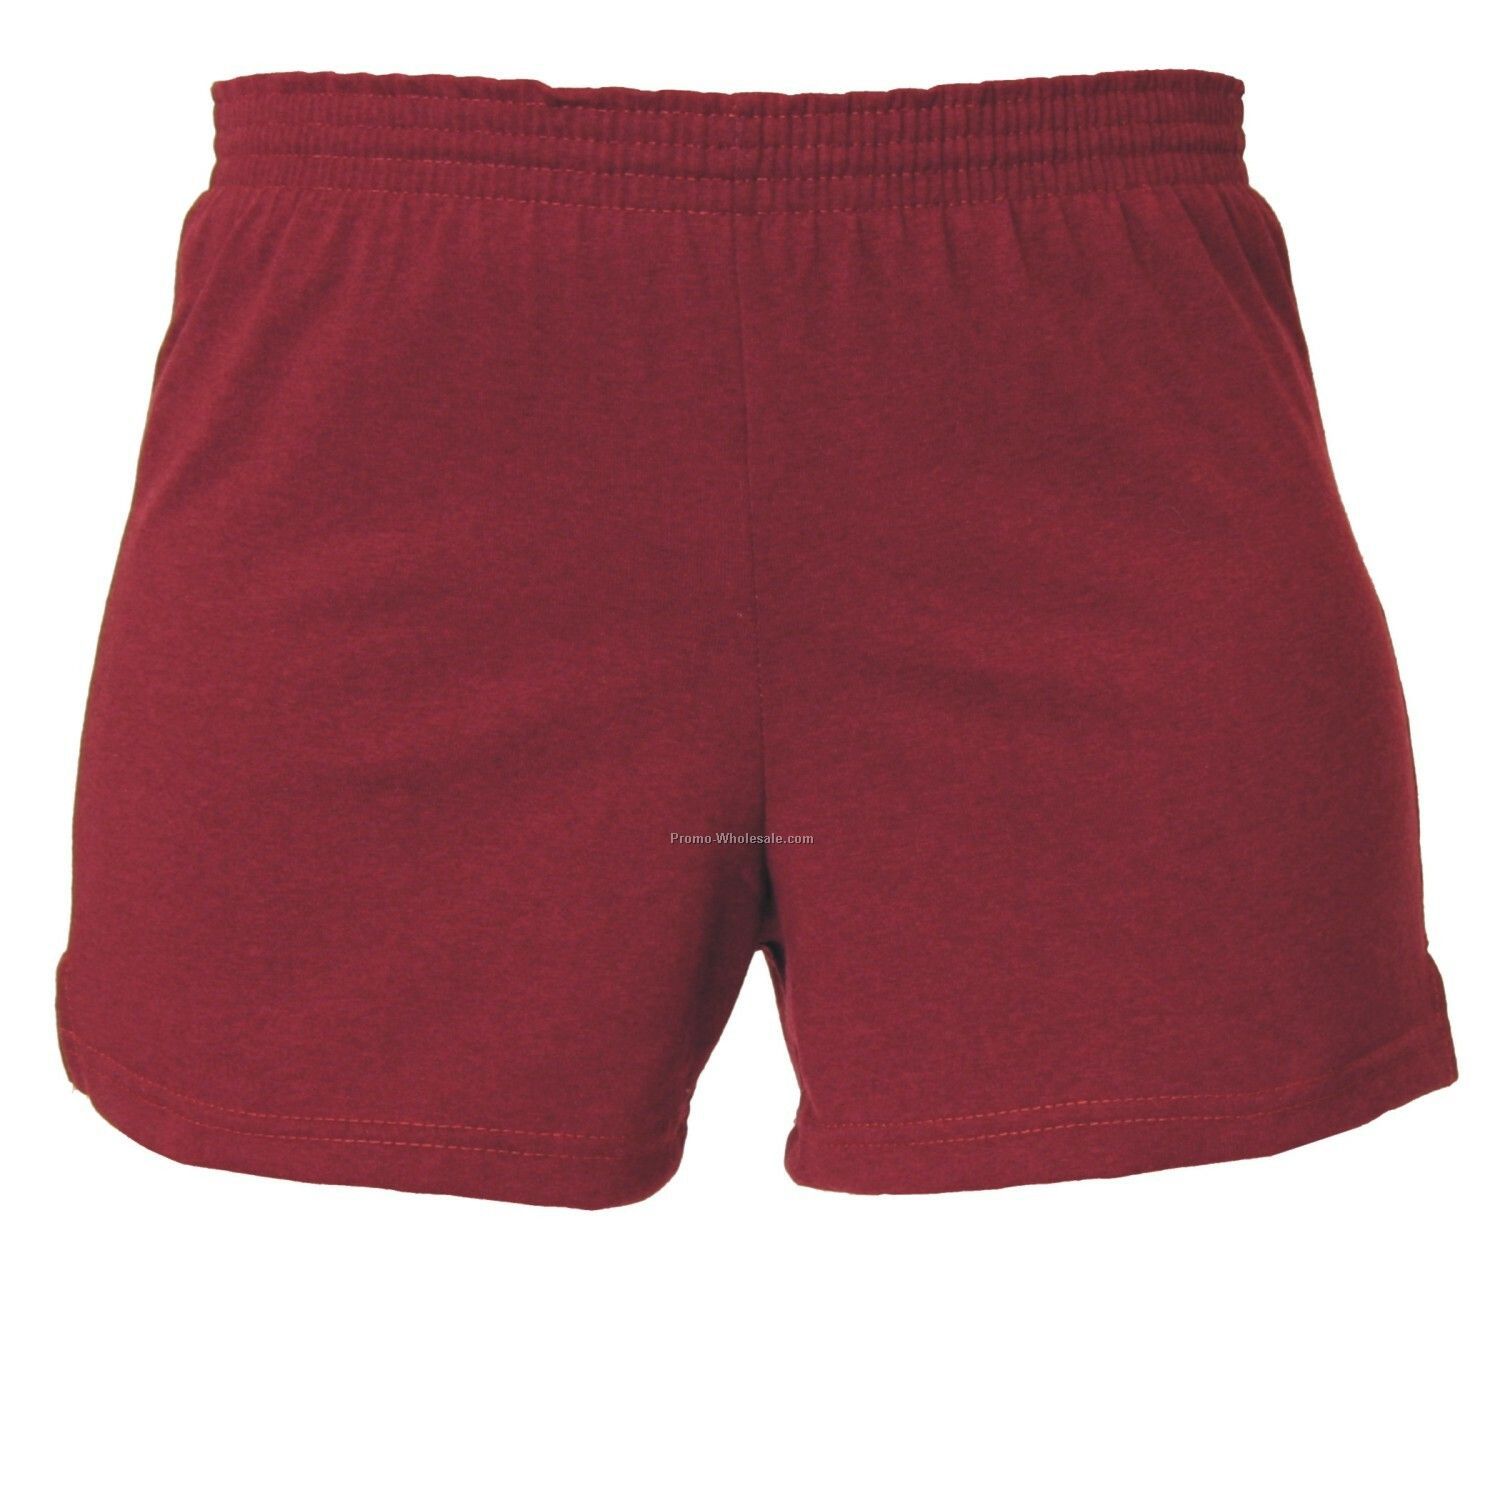 Youths' Maroon Red Spirit Shorts (Ys-yl)